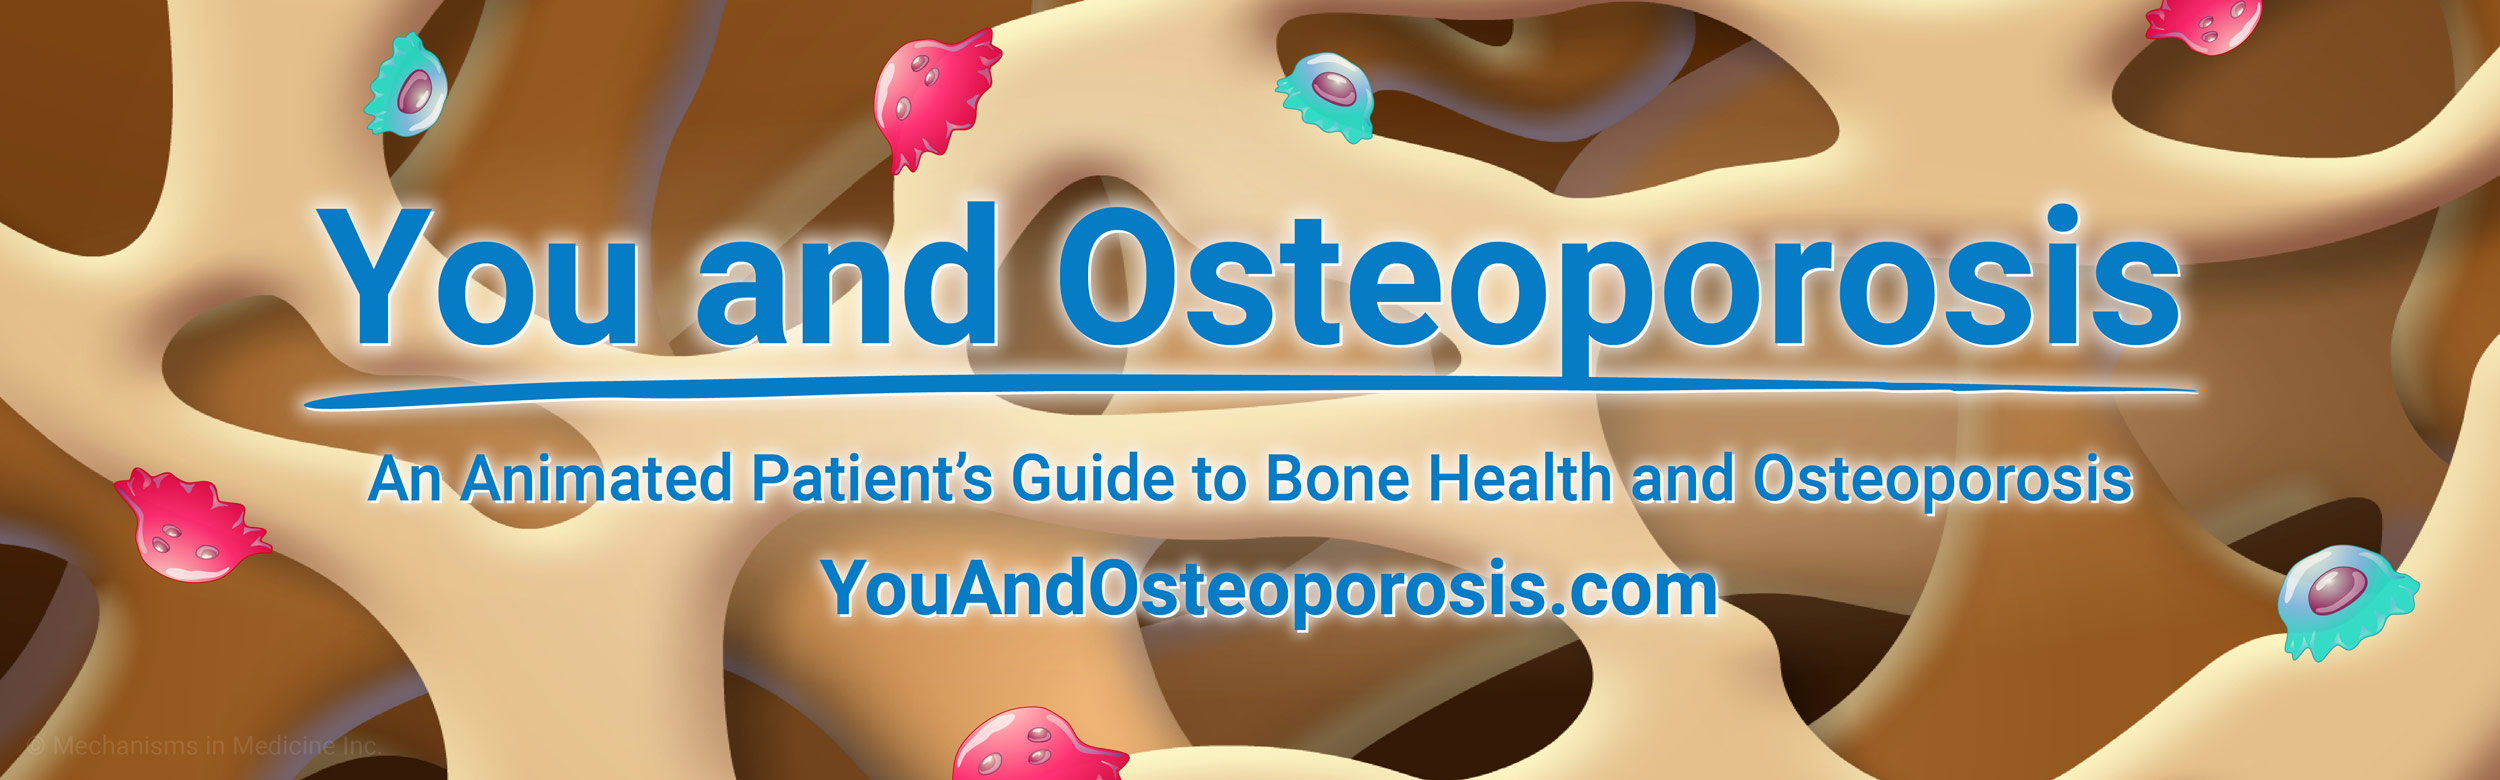 An Animated Guide to Bone Health and Osteoporosis - American Bone Health